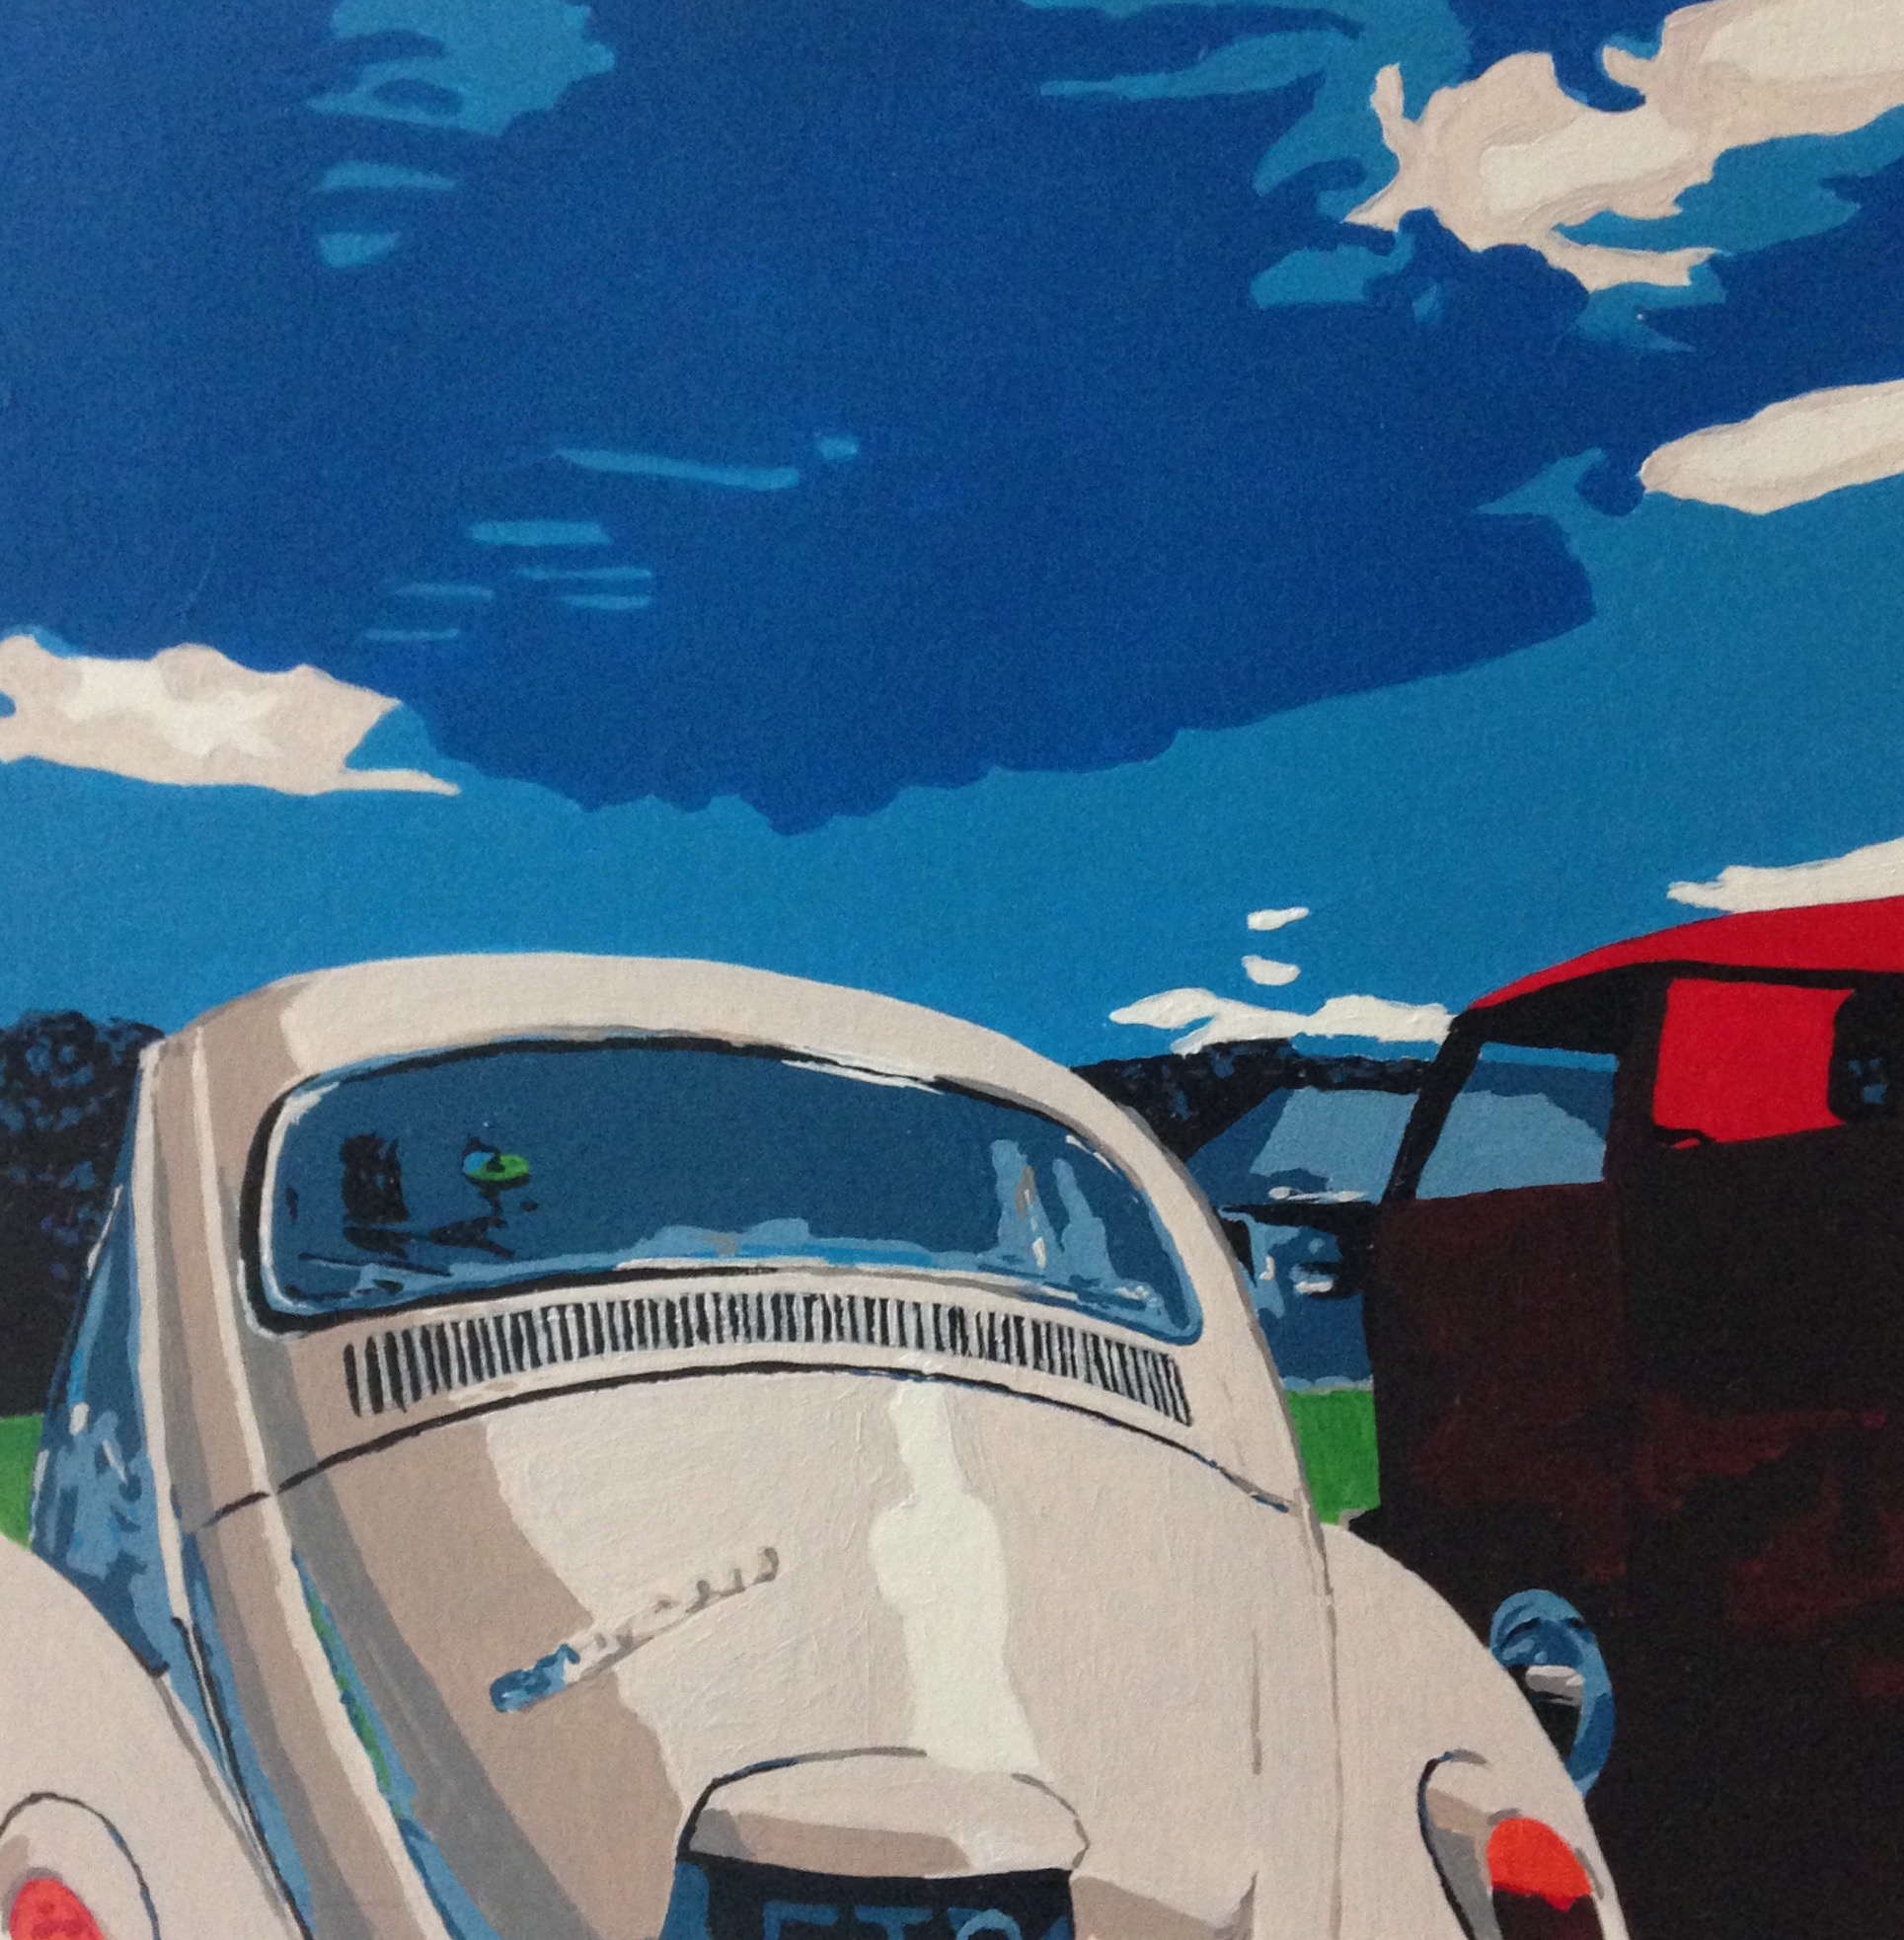 VW Beetle acrylic painting by Louisa Hill